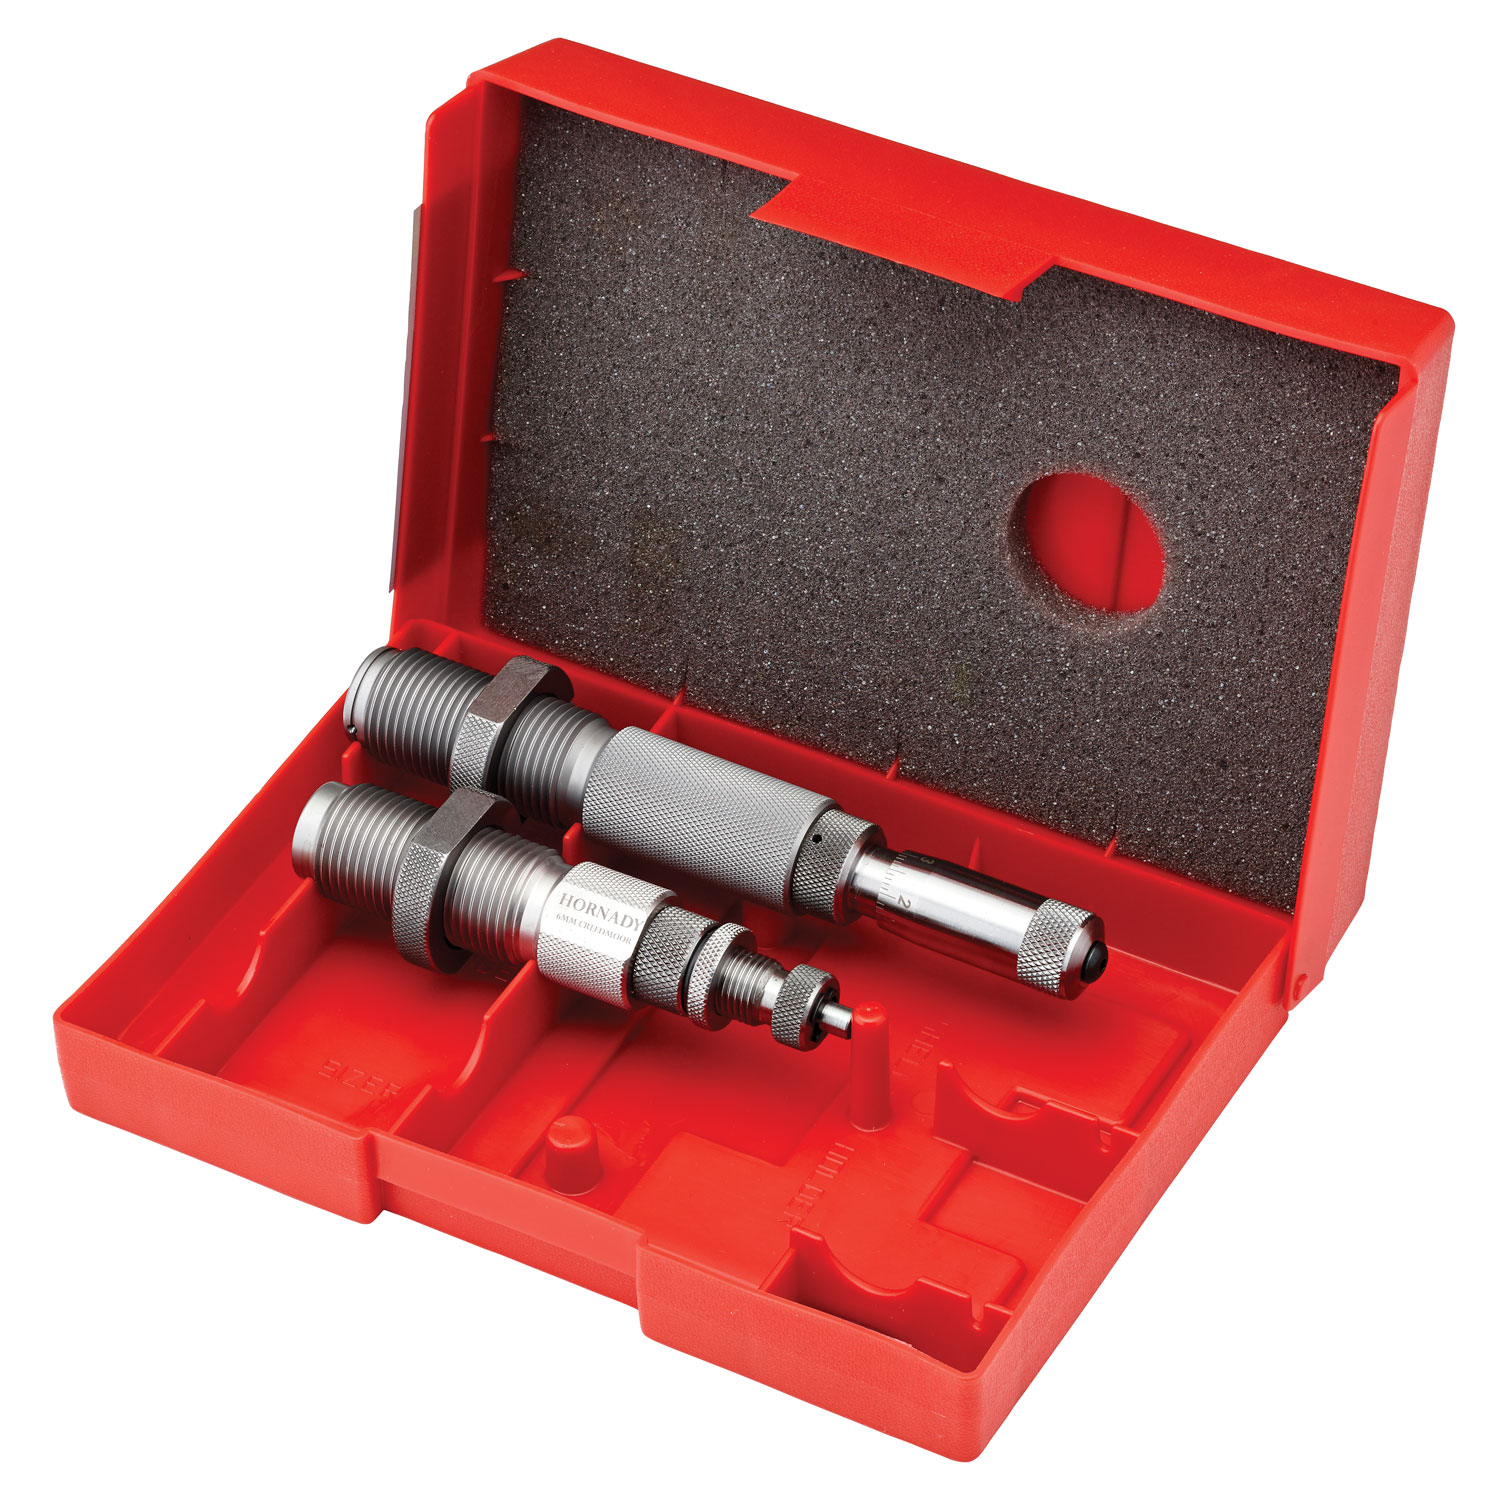 Hornady 544249 Match Grade 2 Die Set for 6mm BR Includes Bushing/Seater